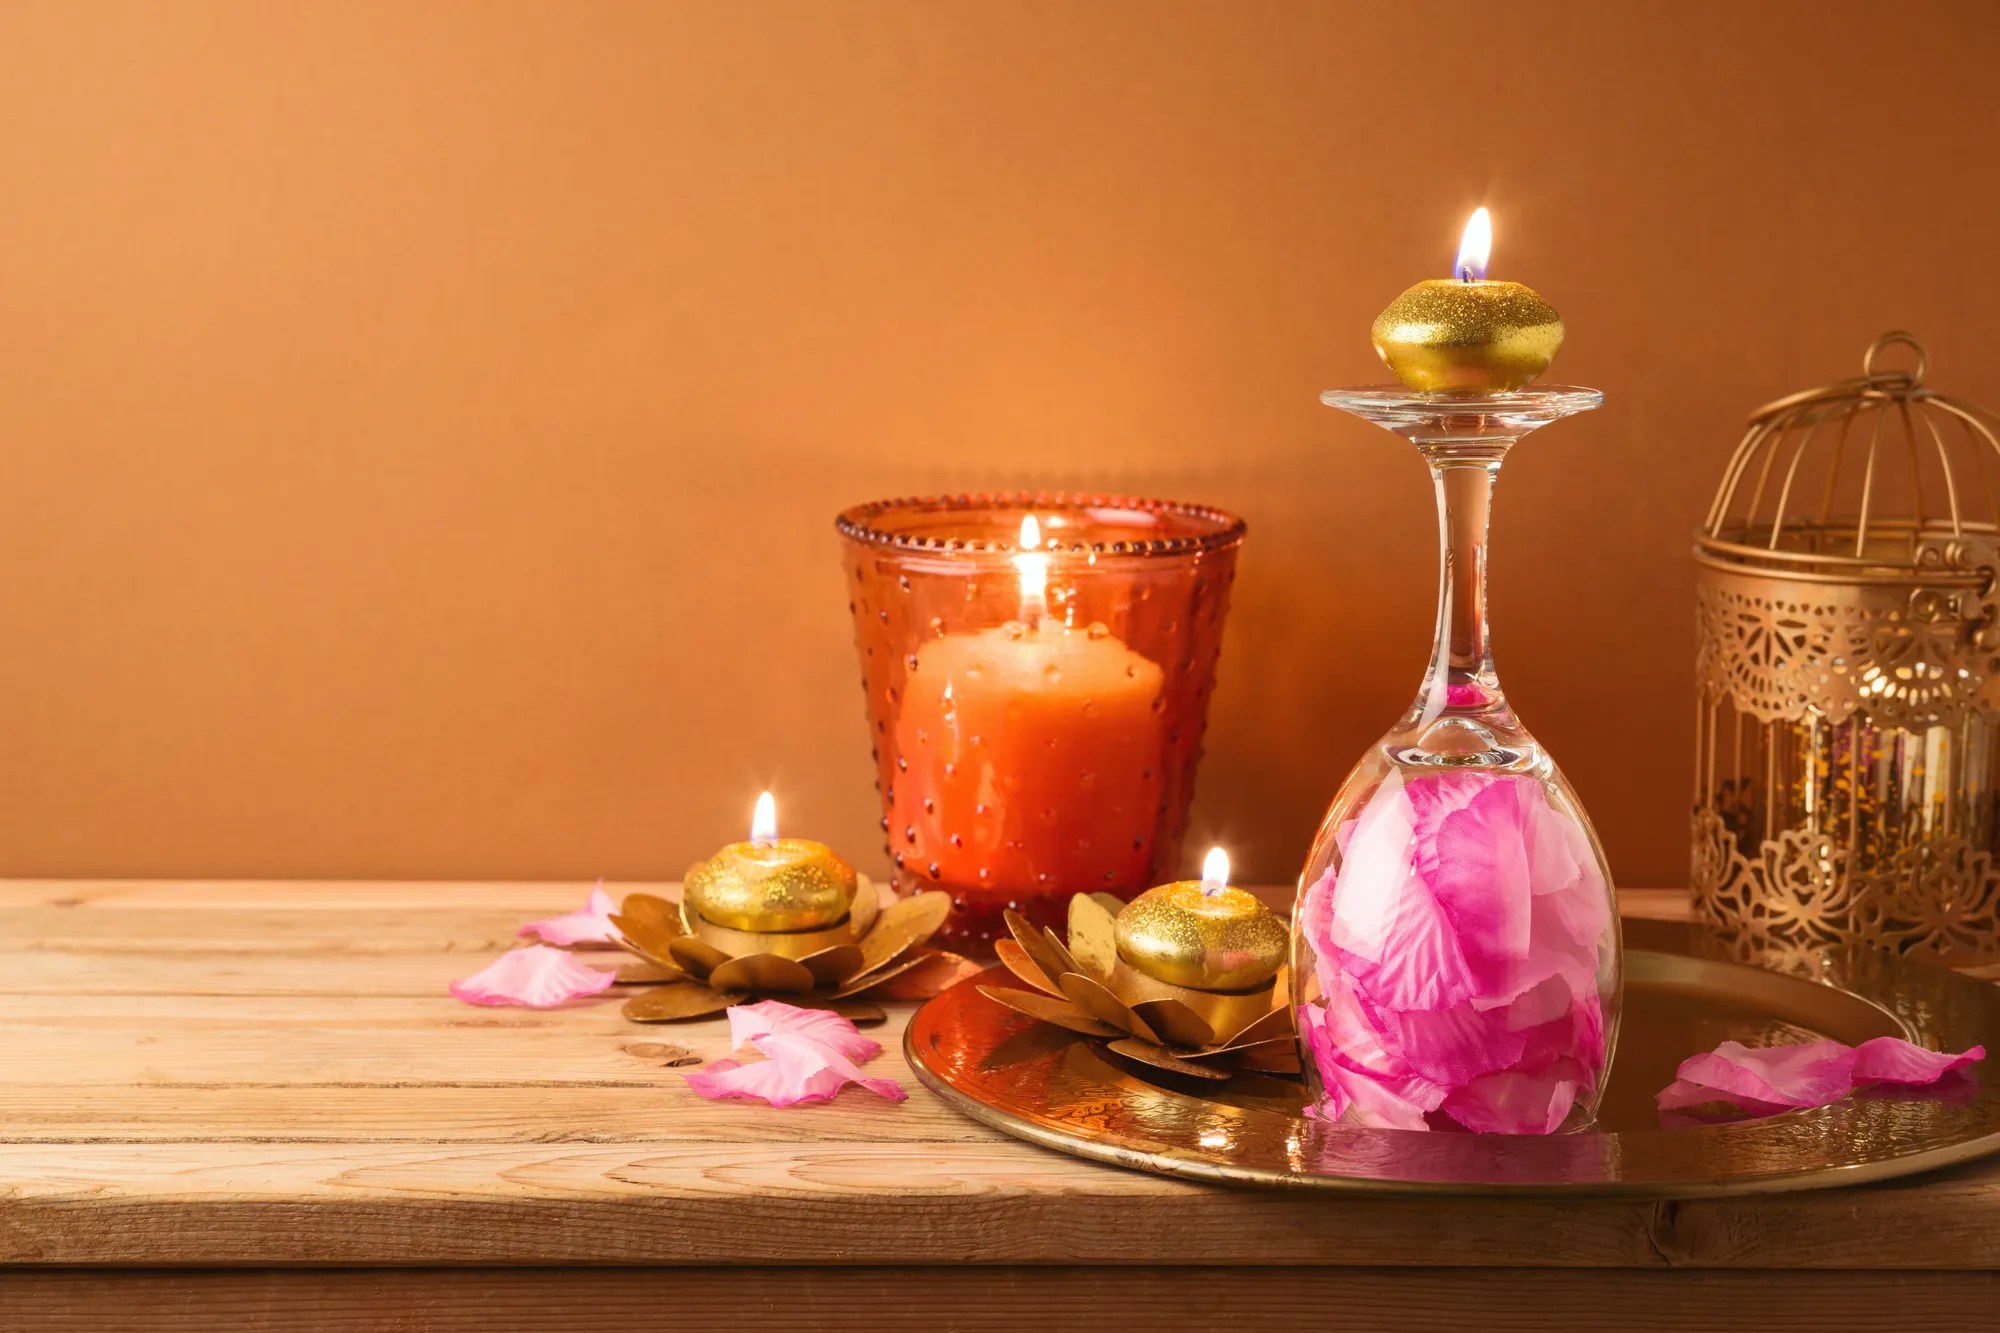 Brighten Up Your Diwali Decor At Home This Year With These Uniquely Designed Candles